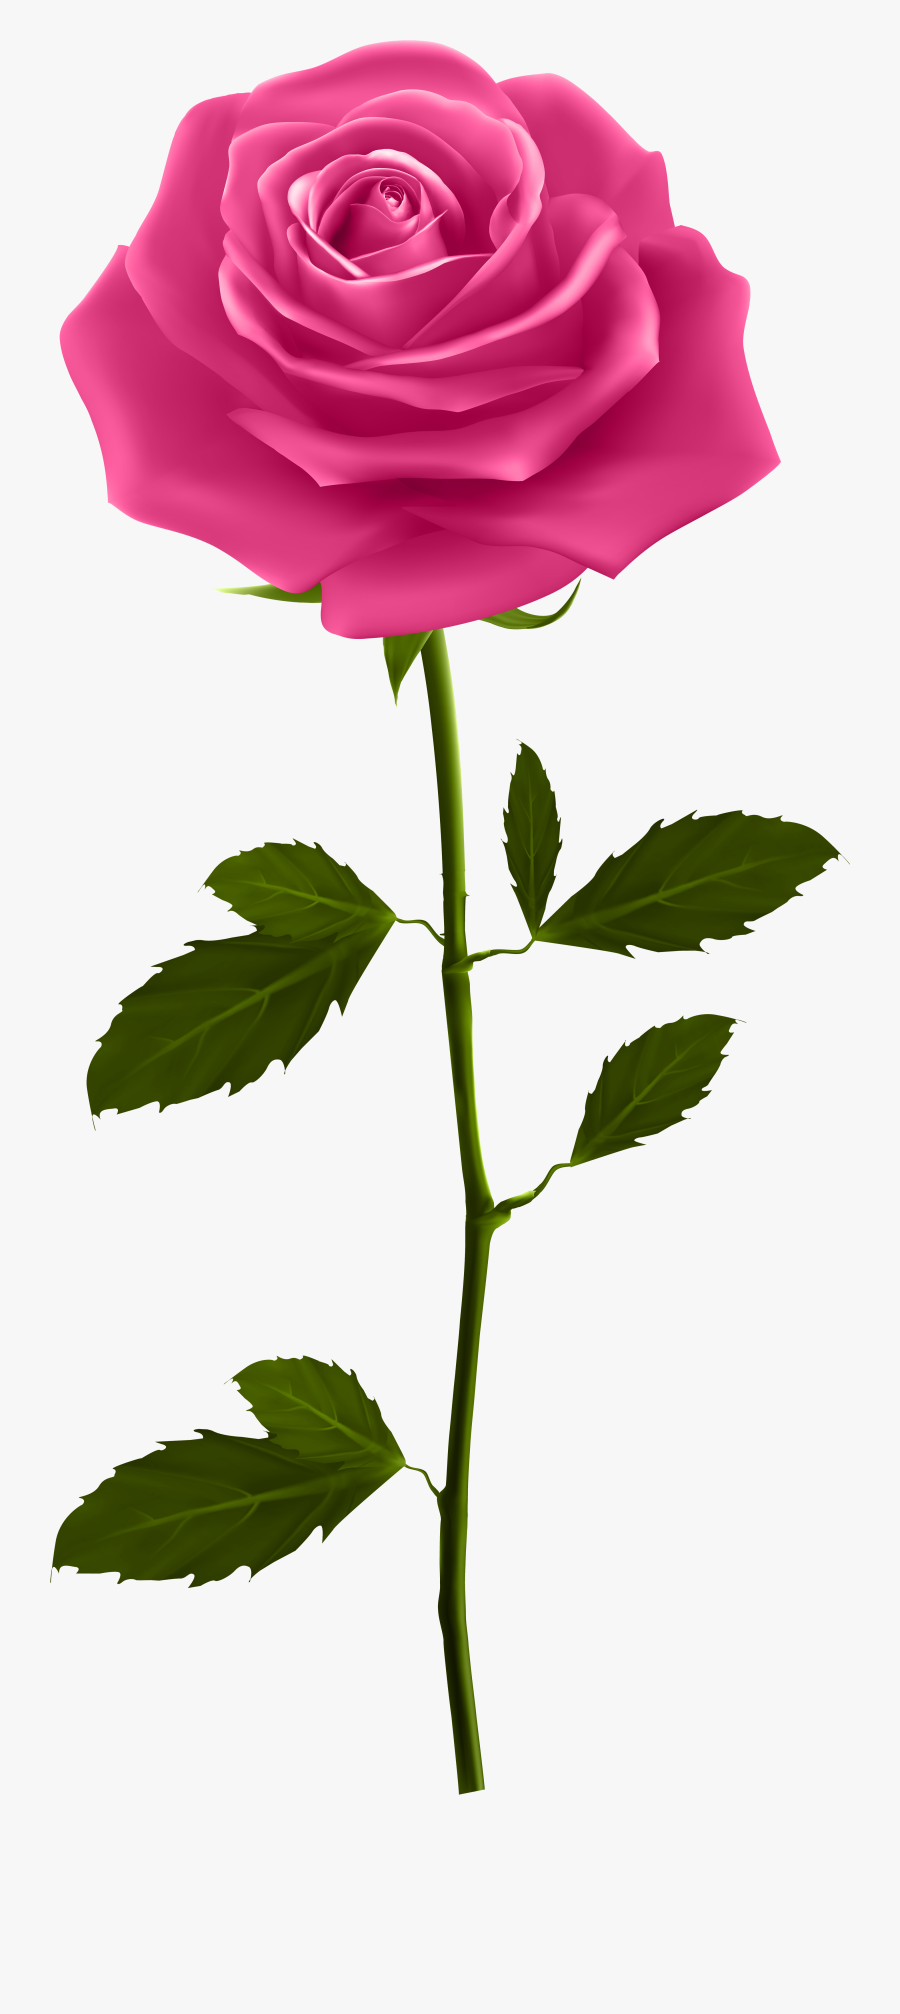 Pink With Stem Png - Pink Rose With Stem, Transparent Clipart